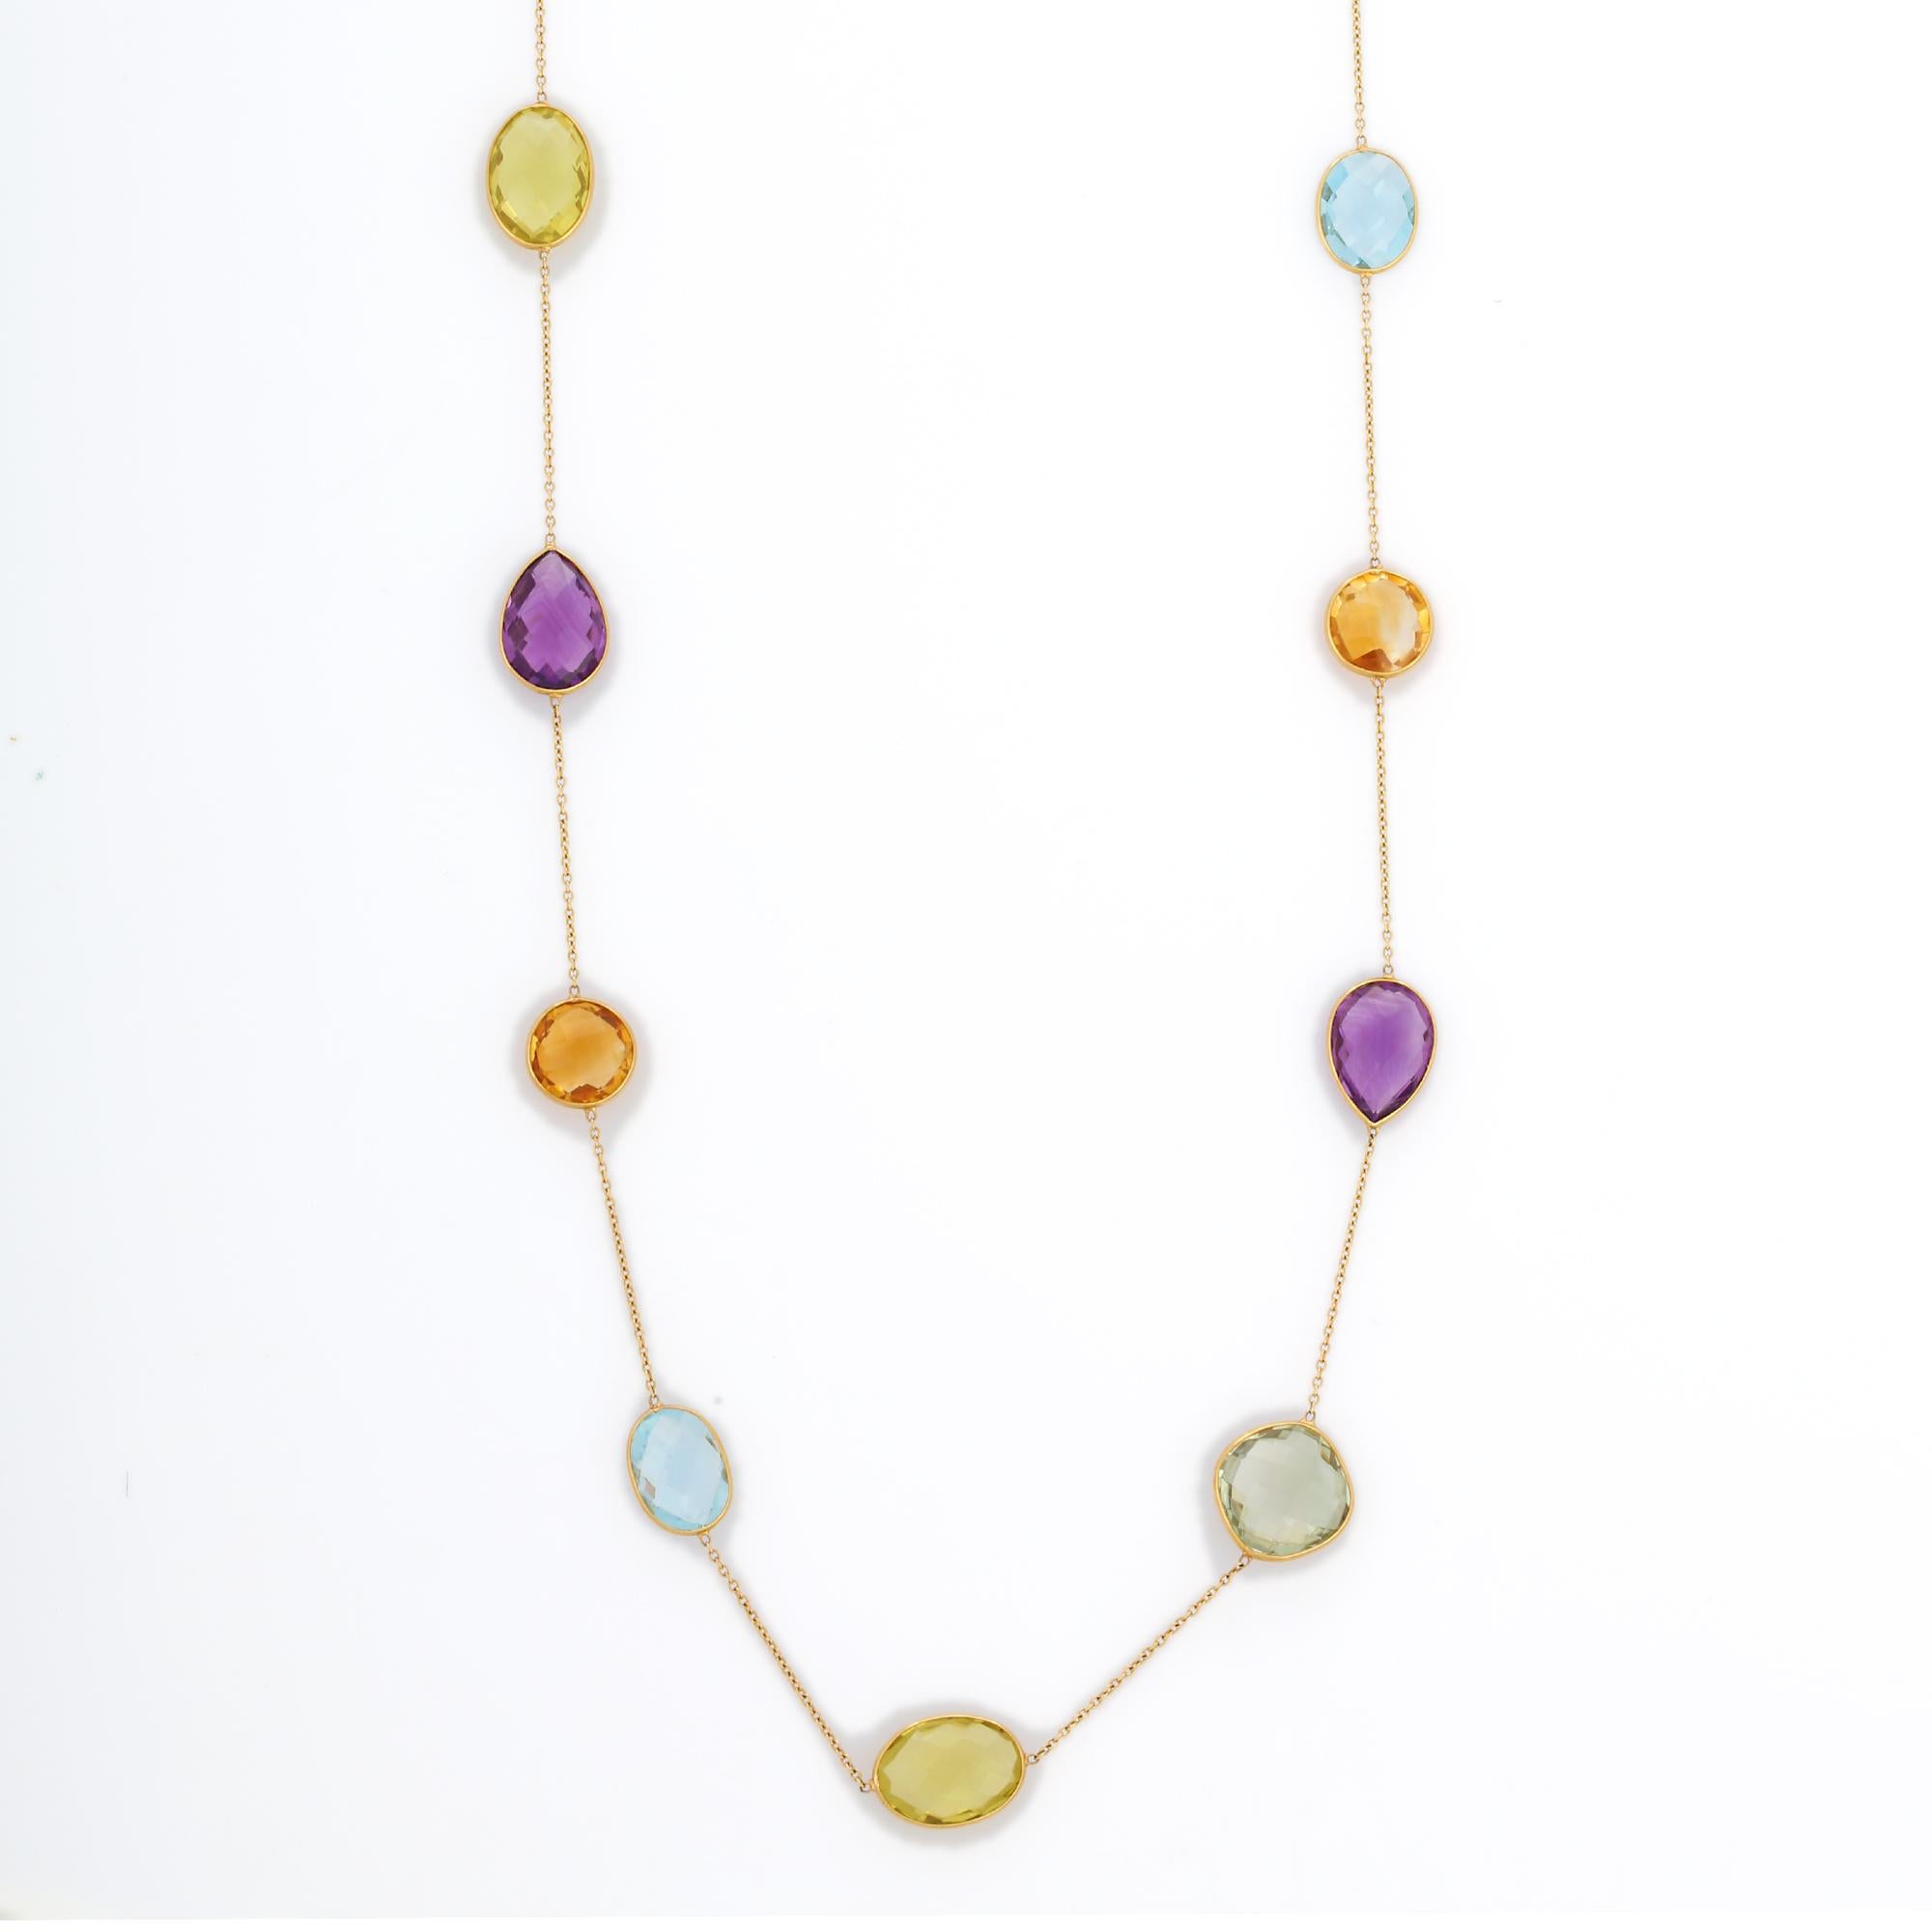 Multi Semi Precious Gemstone Chain Necklace in 18K Gold studded with mix cut multi gemstone.
Accessorize your look with this elegant semi multi gemstone chain necklace. This stunning piece of jewelry instantly elevates a casual look or dressy